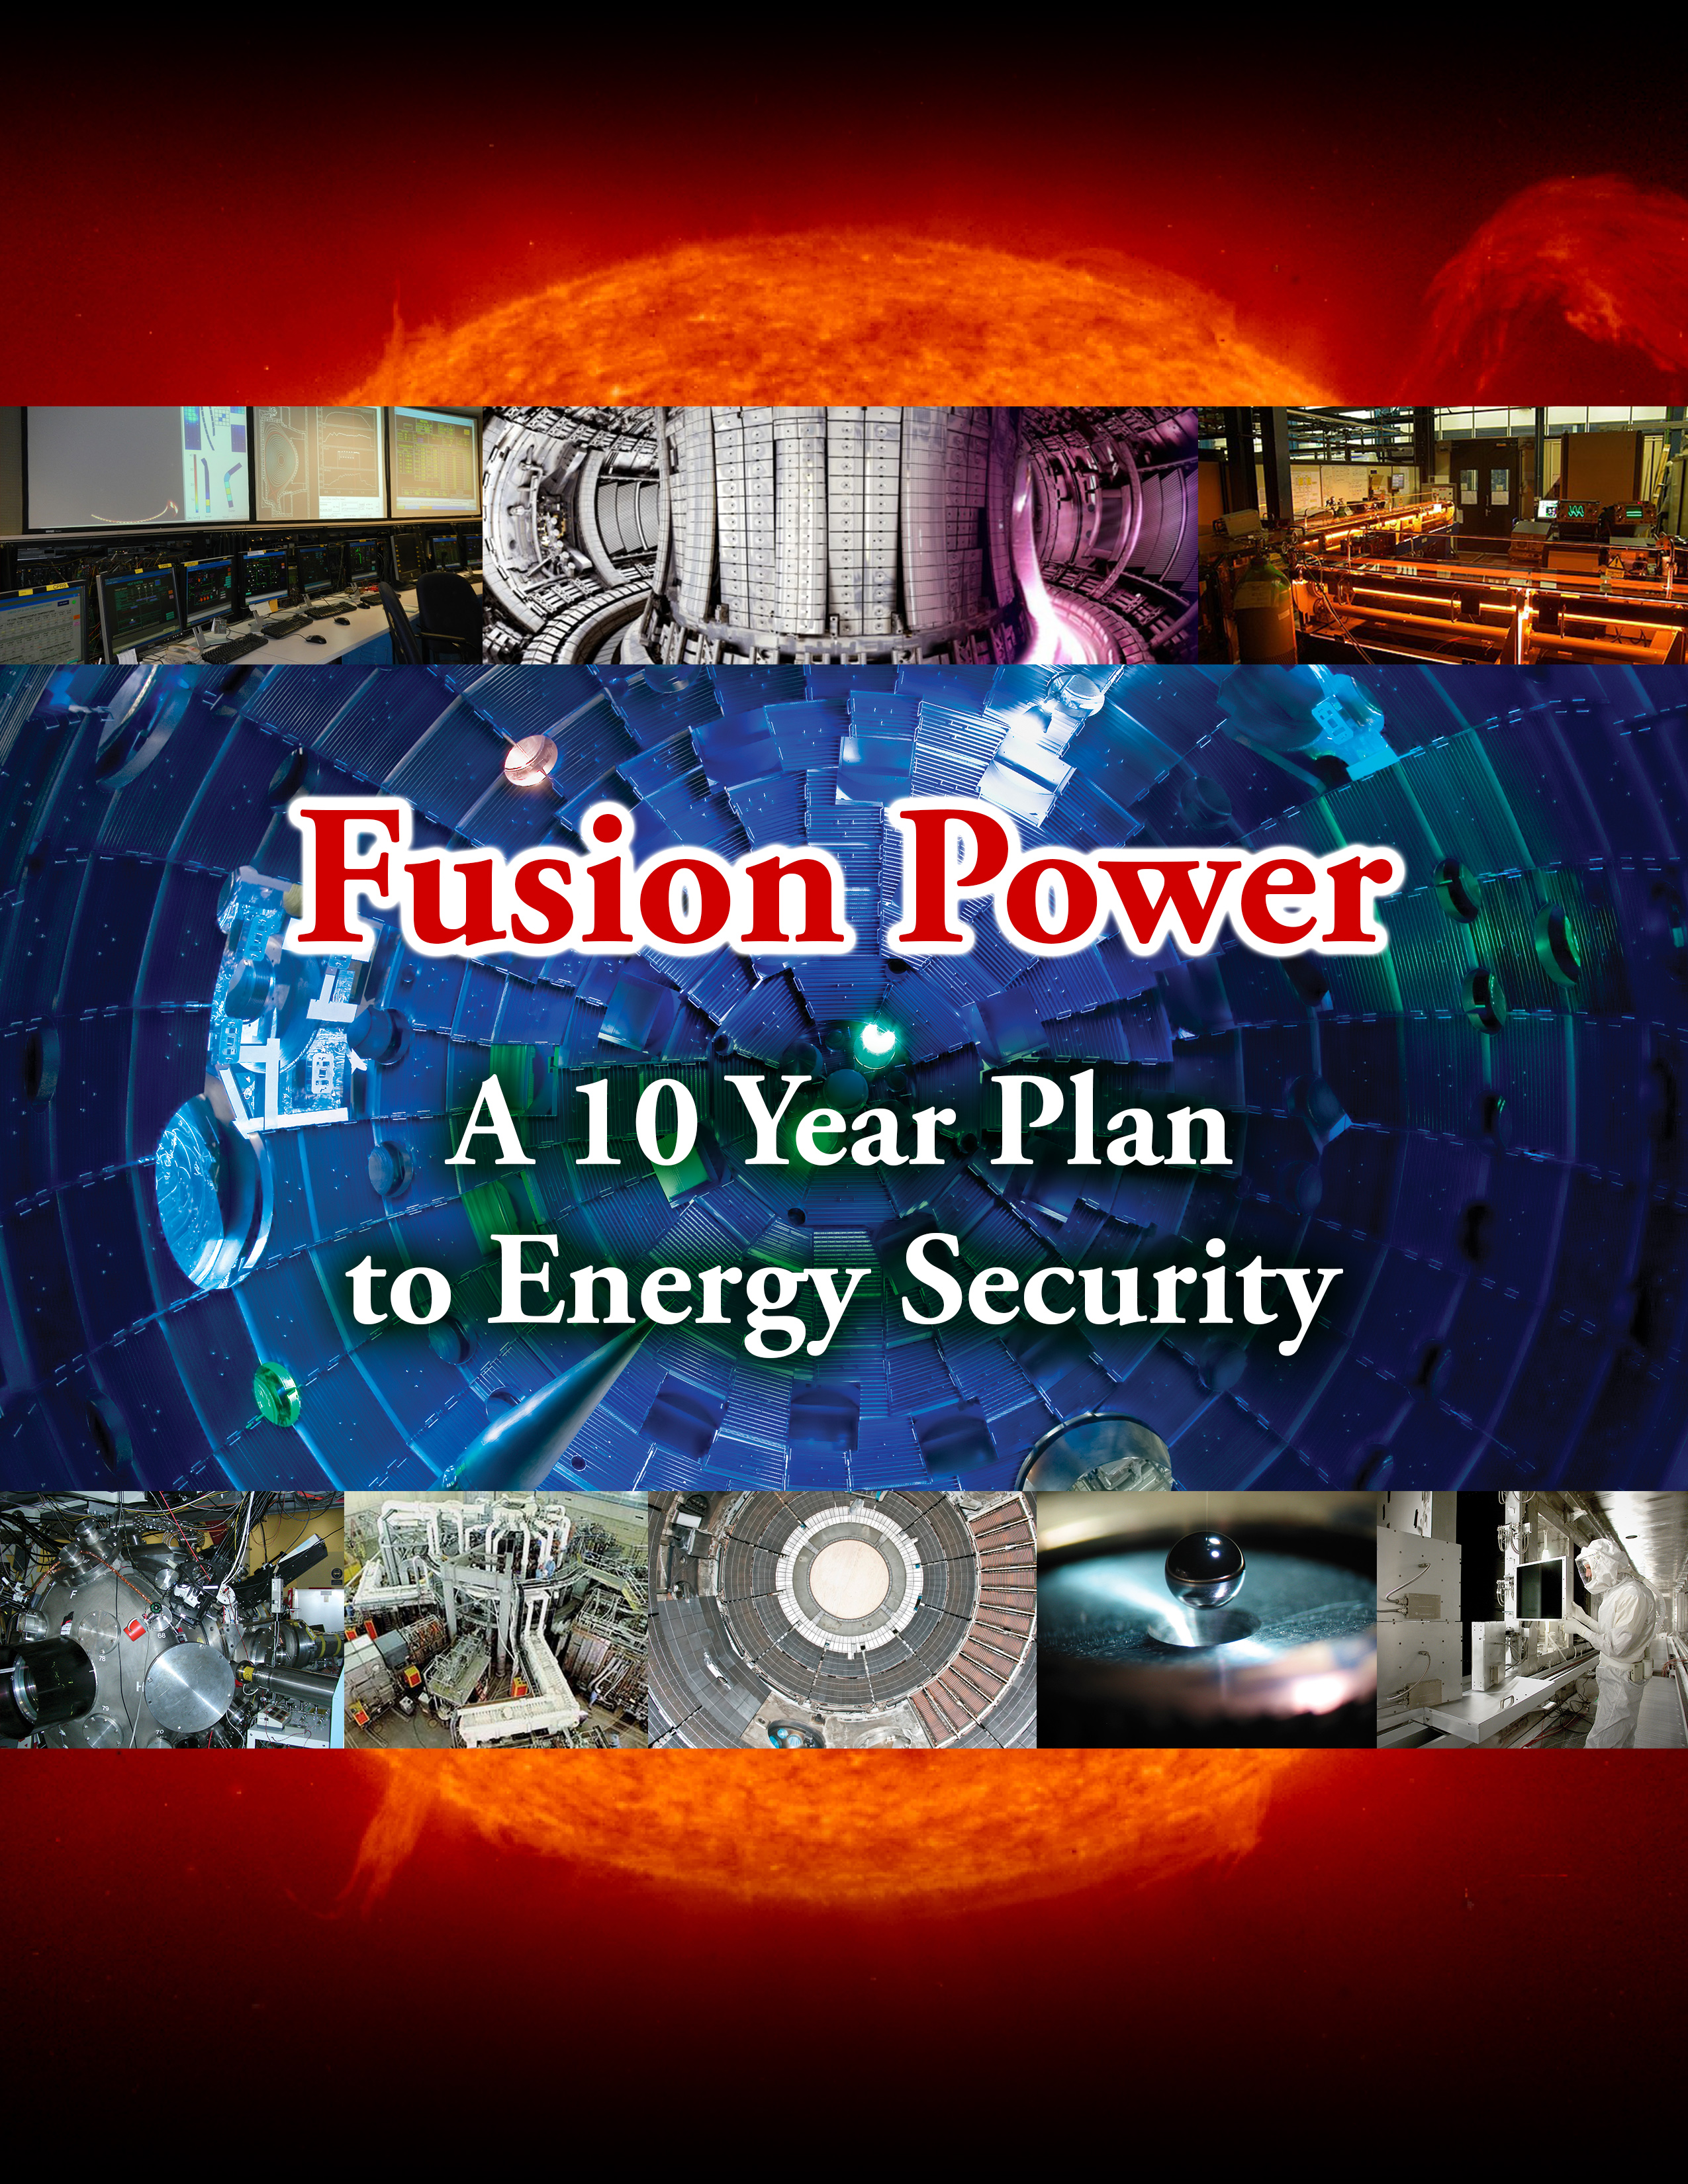 WHITE PAPER: Fusion Power – A 10 Year Plan to Energy Security